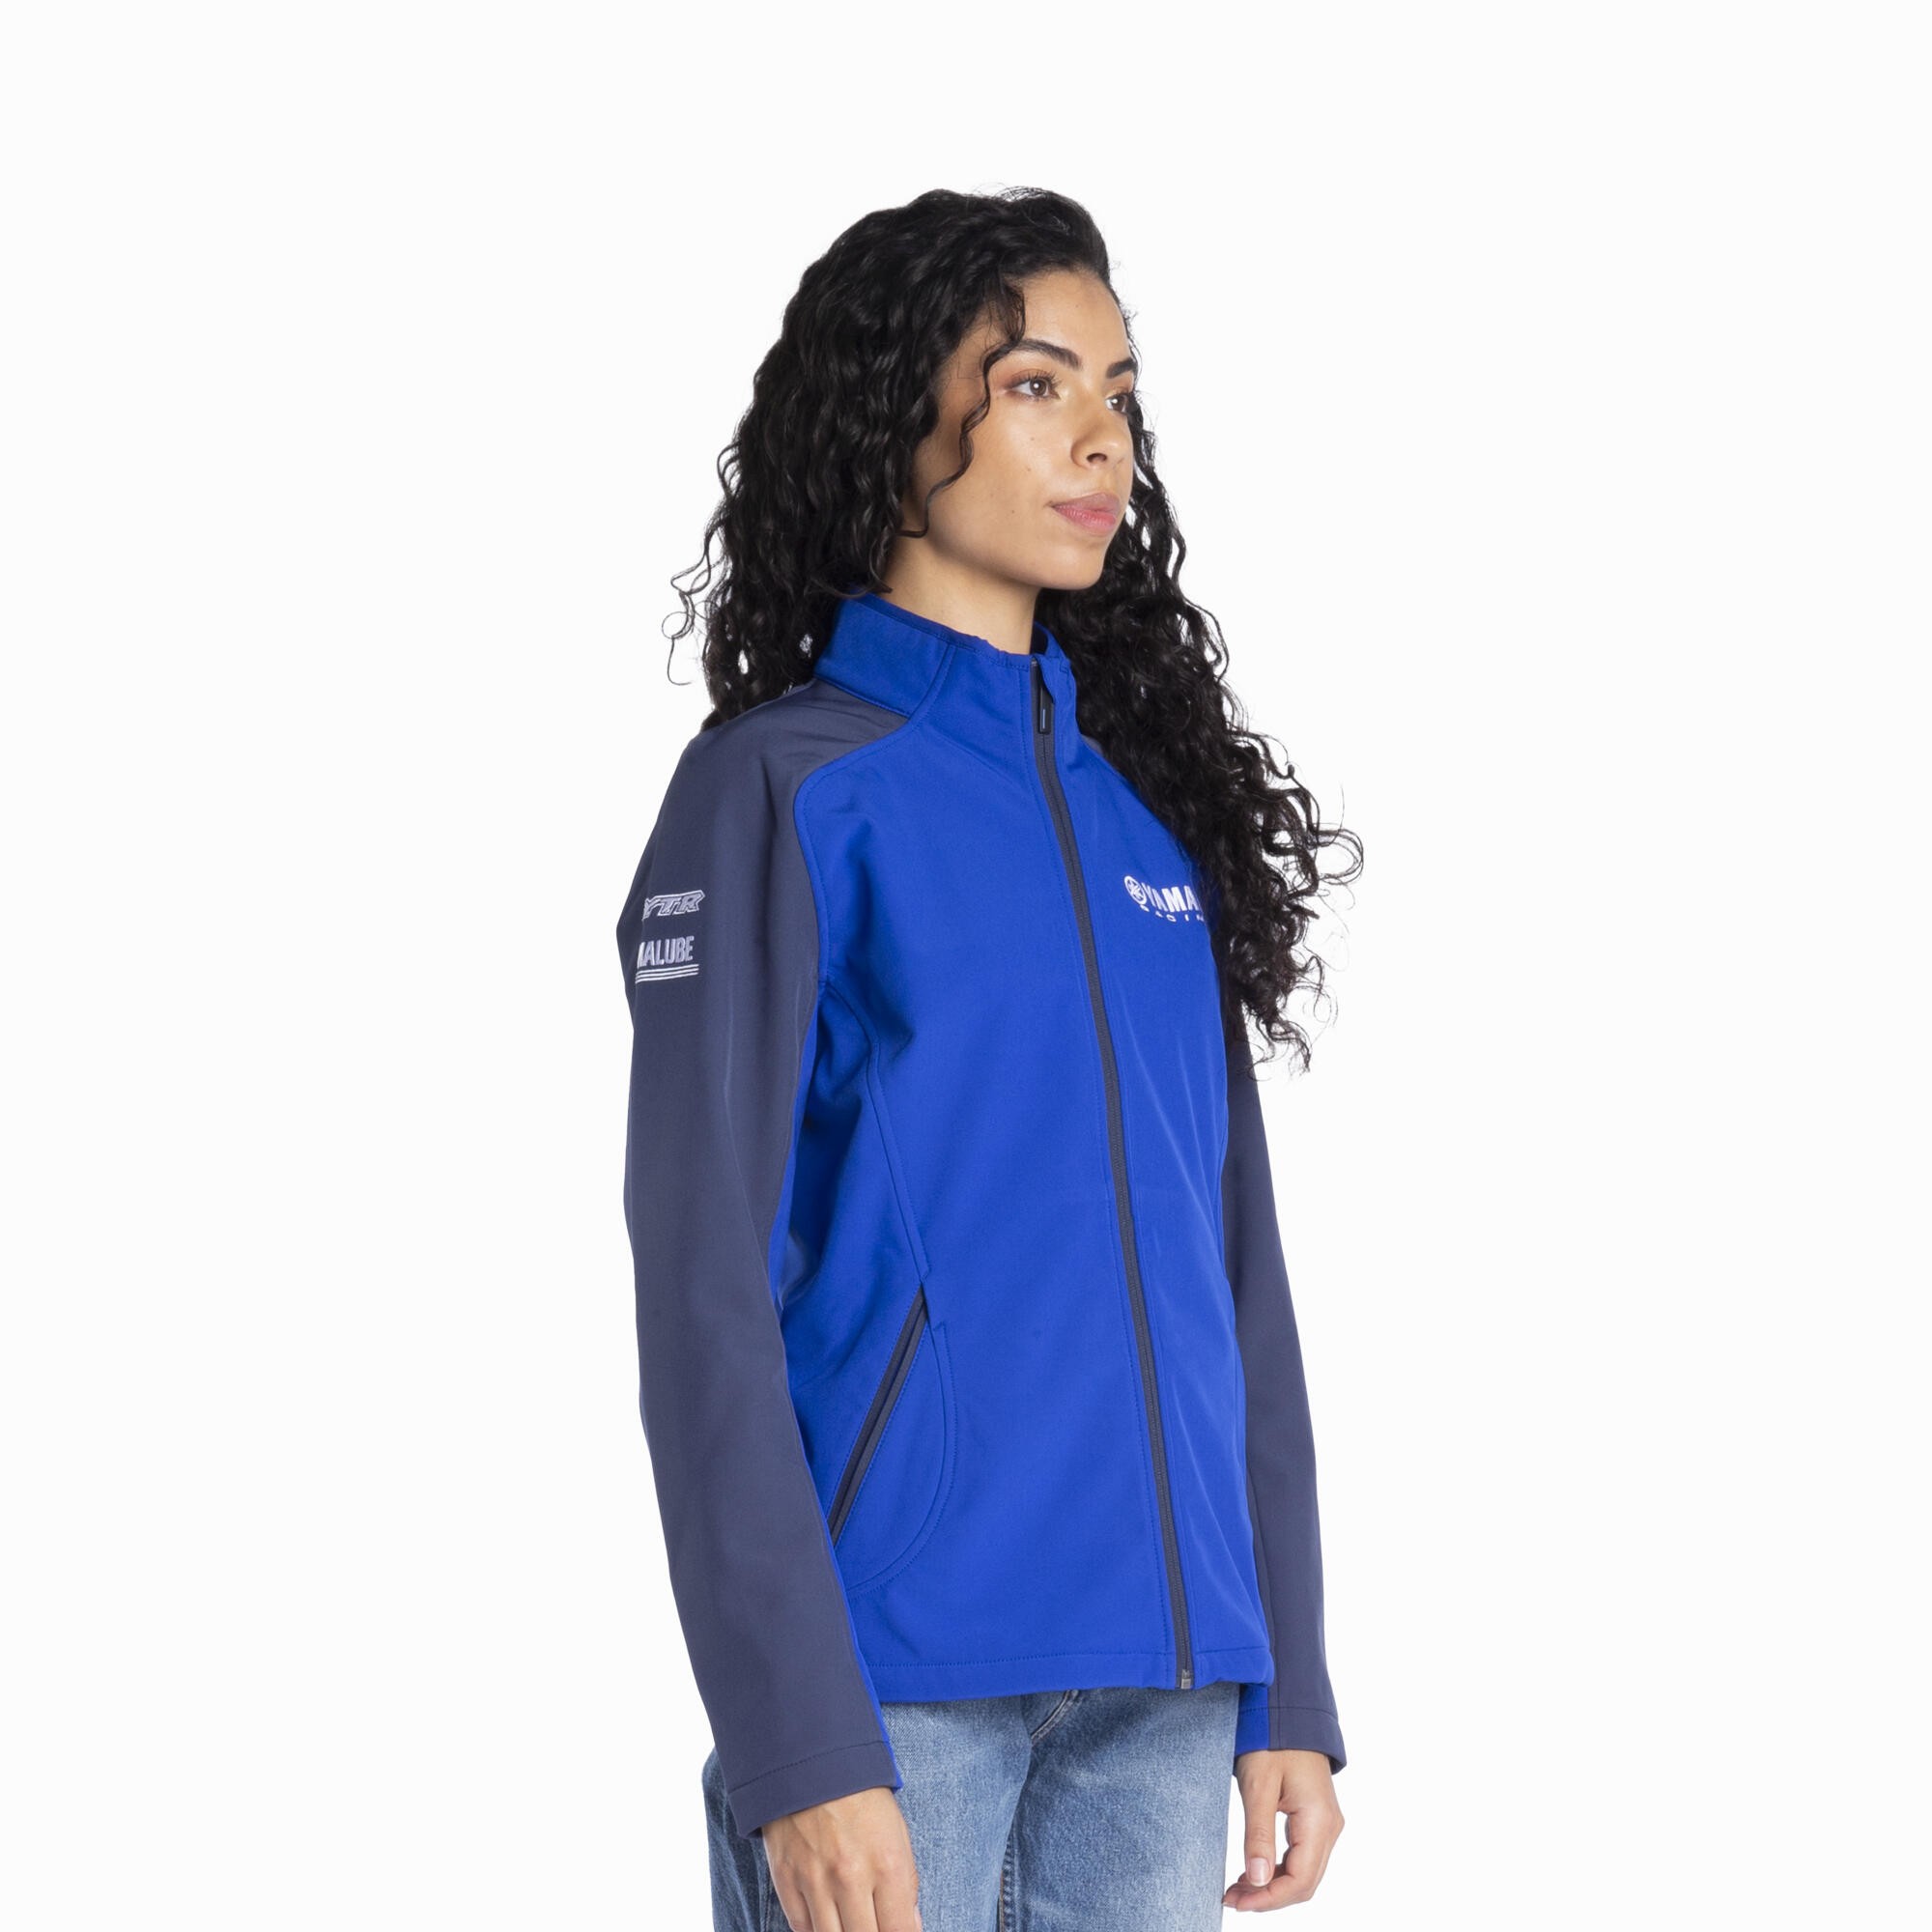 SOFTSHELL PADDOCK BLUE POUR FEMME